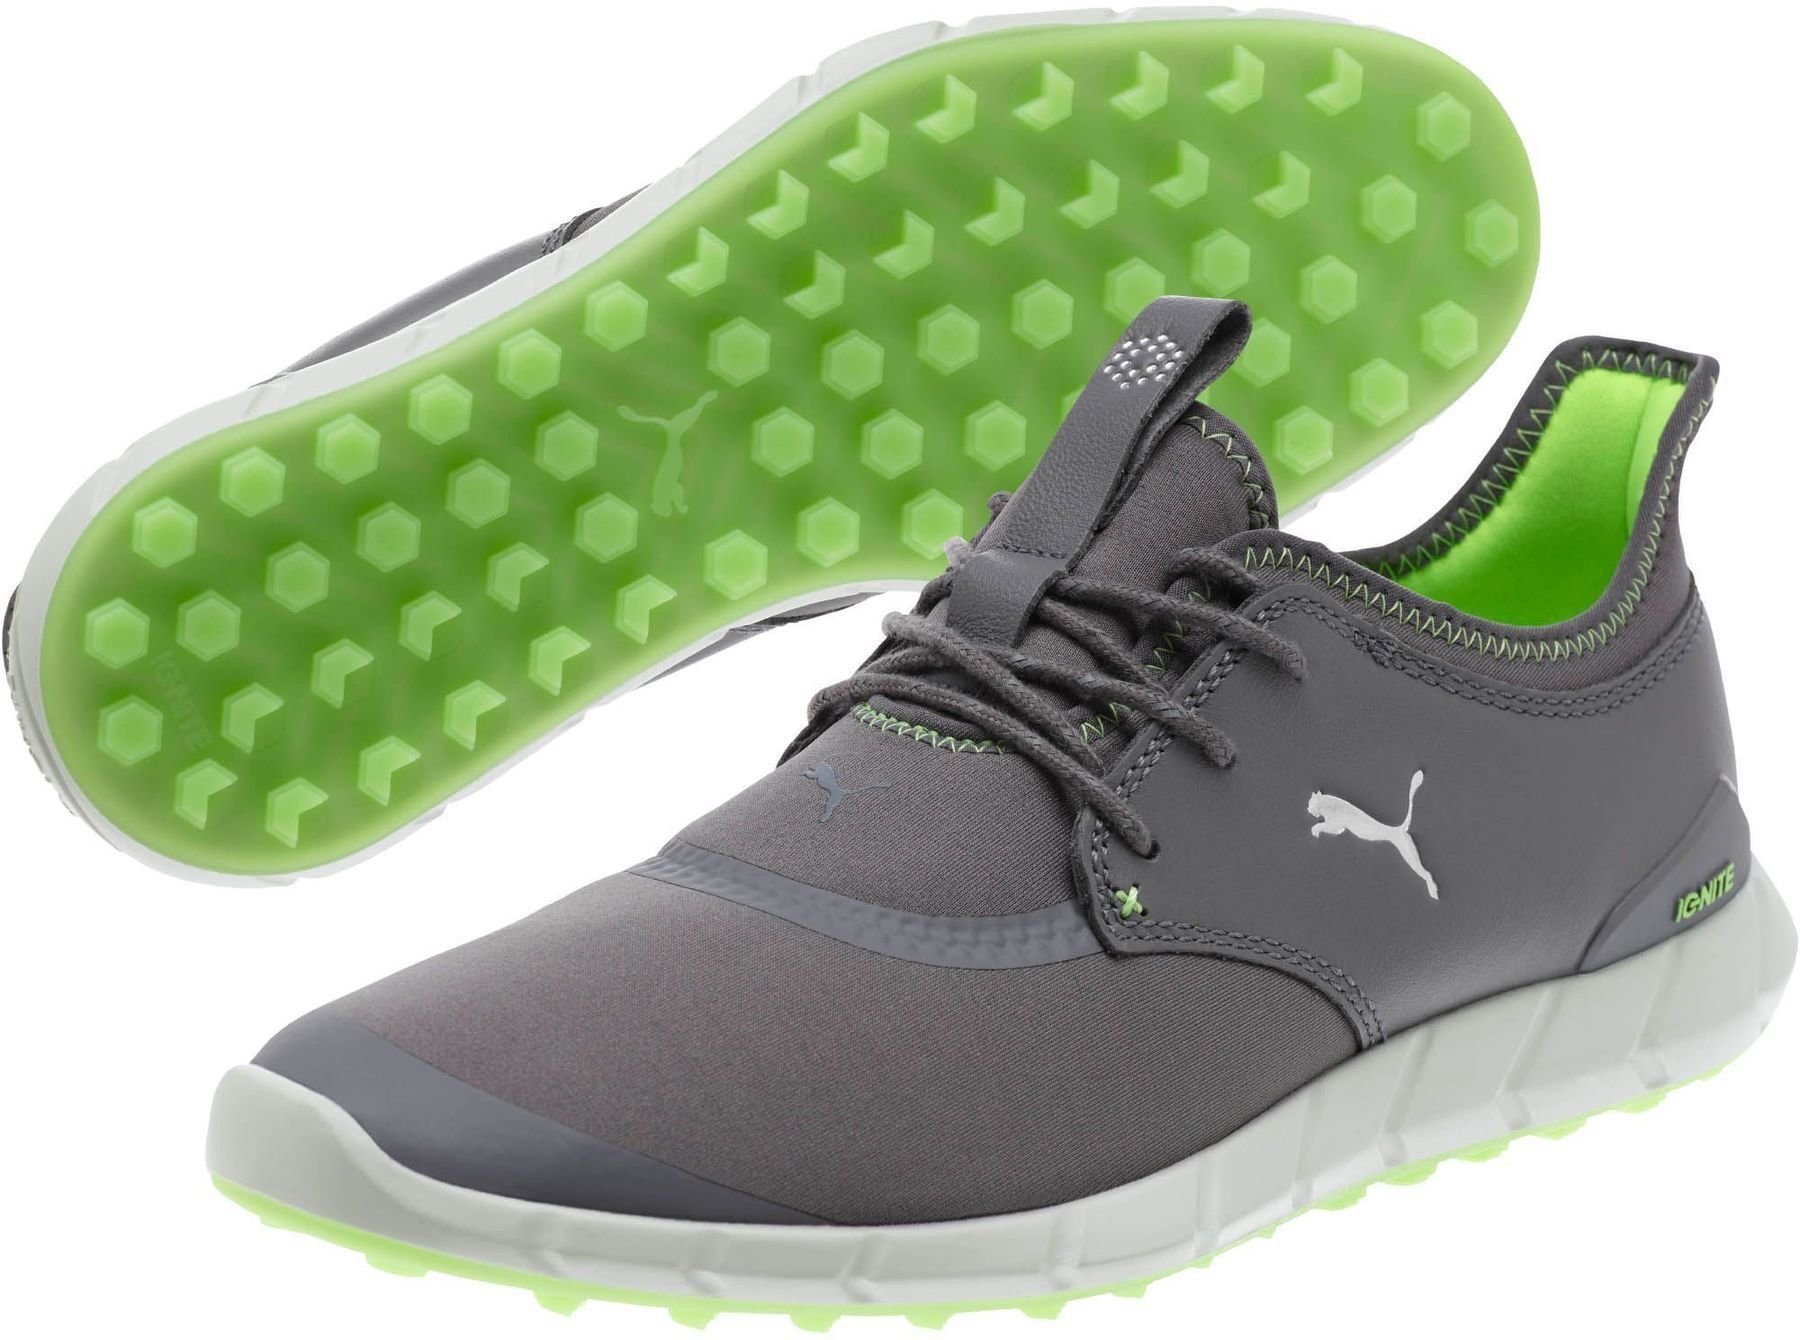 Men's golf shoes Puma Ignite Spikeless Sport Mens Golf Shoes Peacoat/Silver/White UK 10